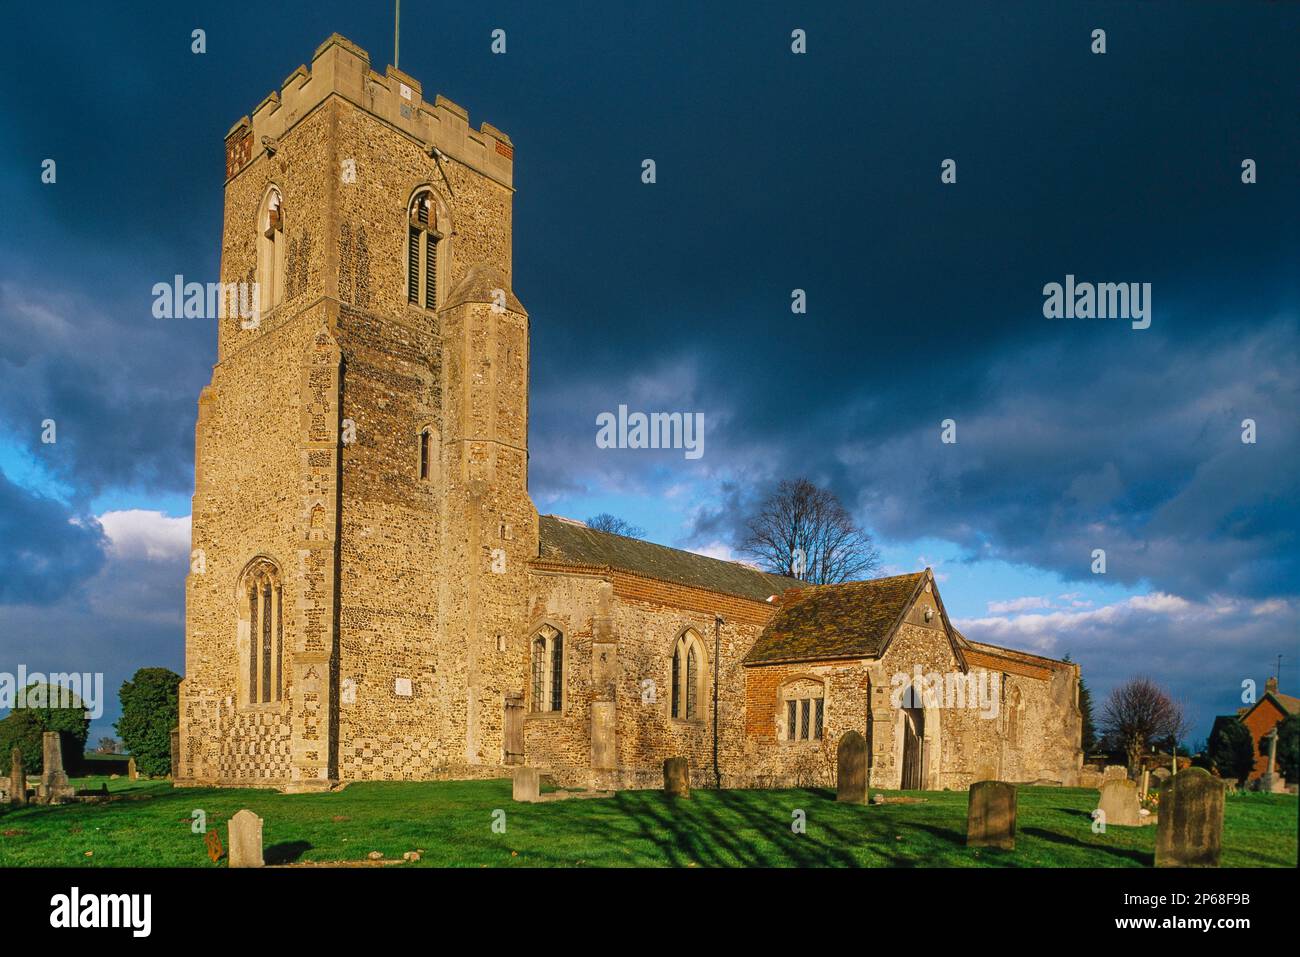 Church England countryside, view of the 15th century Church of St Peter and St Paul sited in the Suffolk village of Kedington, England, UK Stock Photo